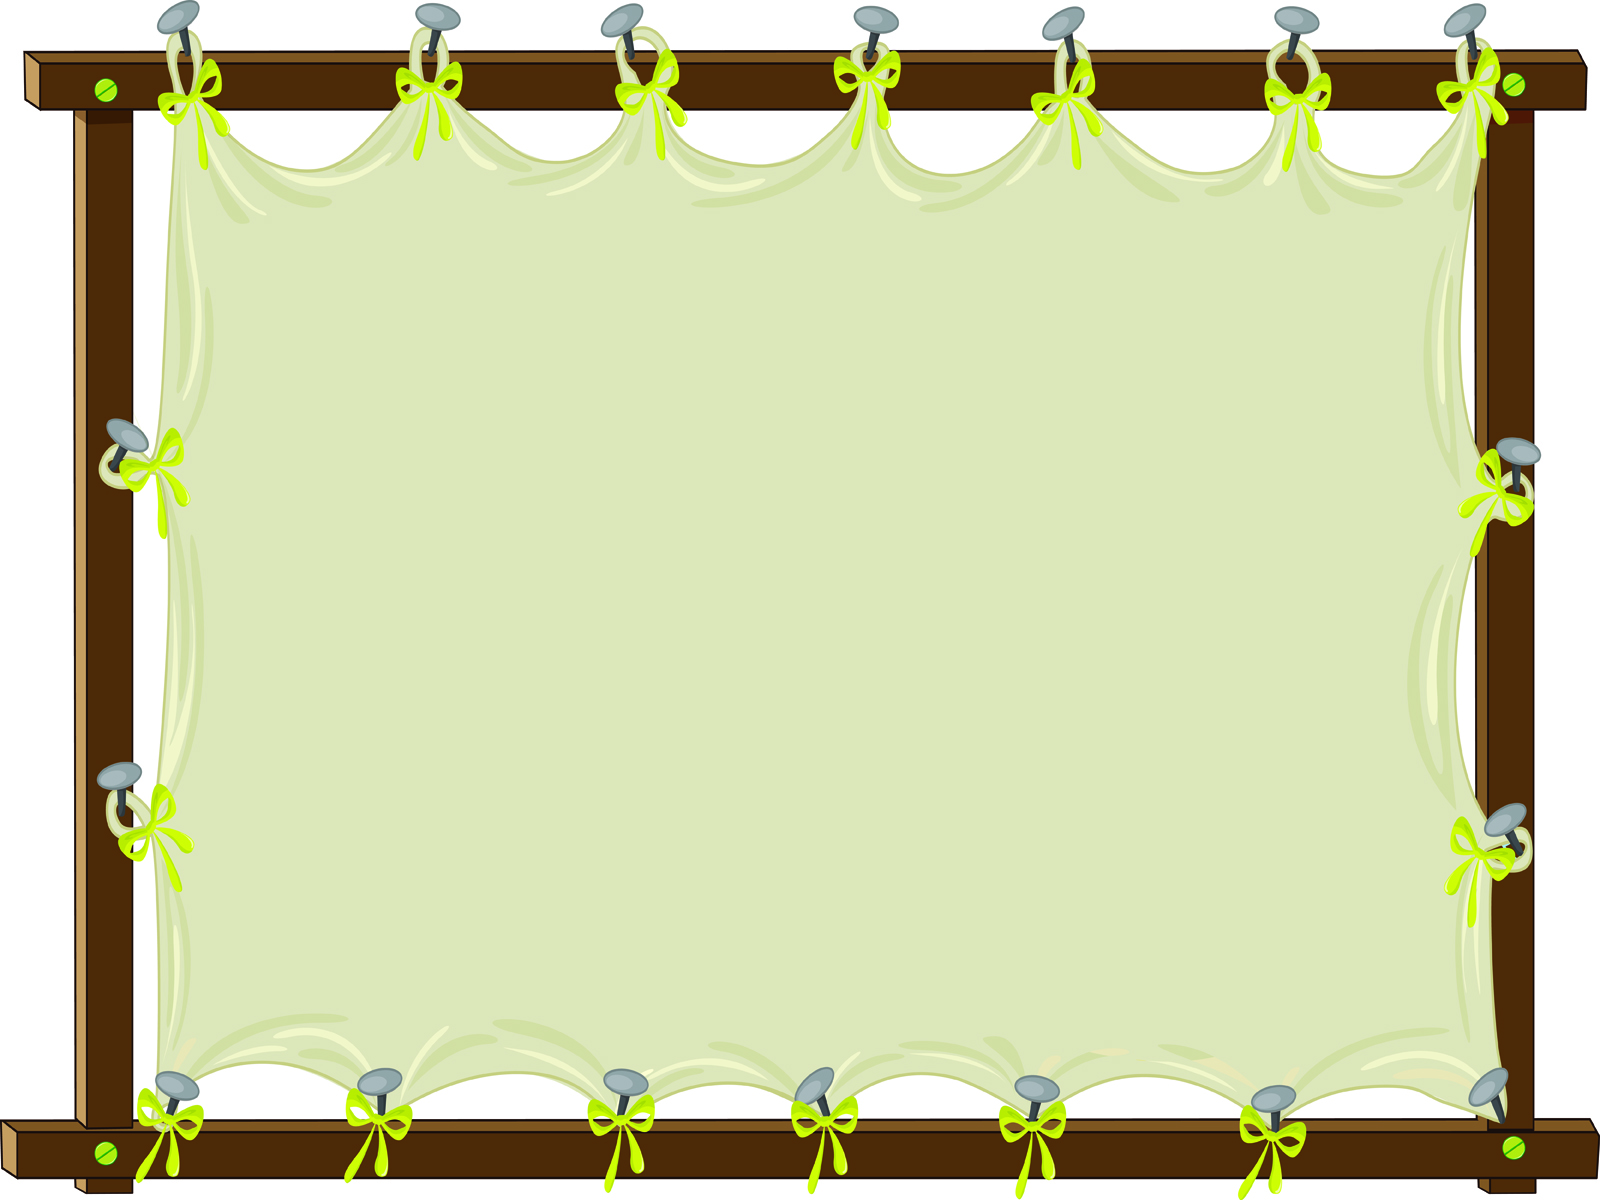 Cute School Backgrounds For Powerpoint Craft Projects School